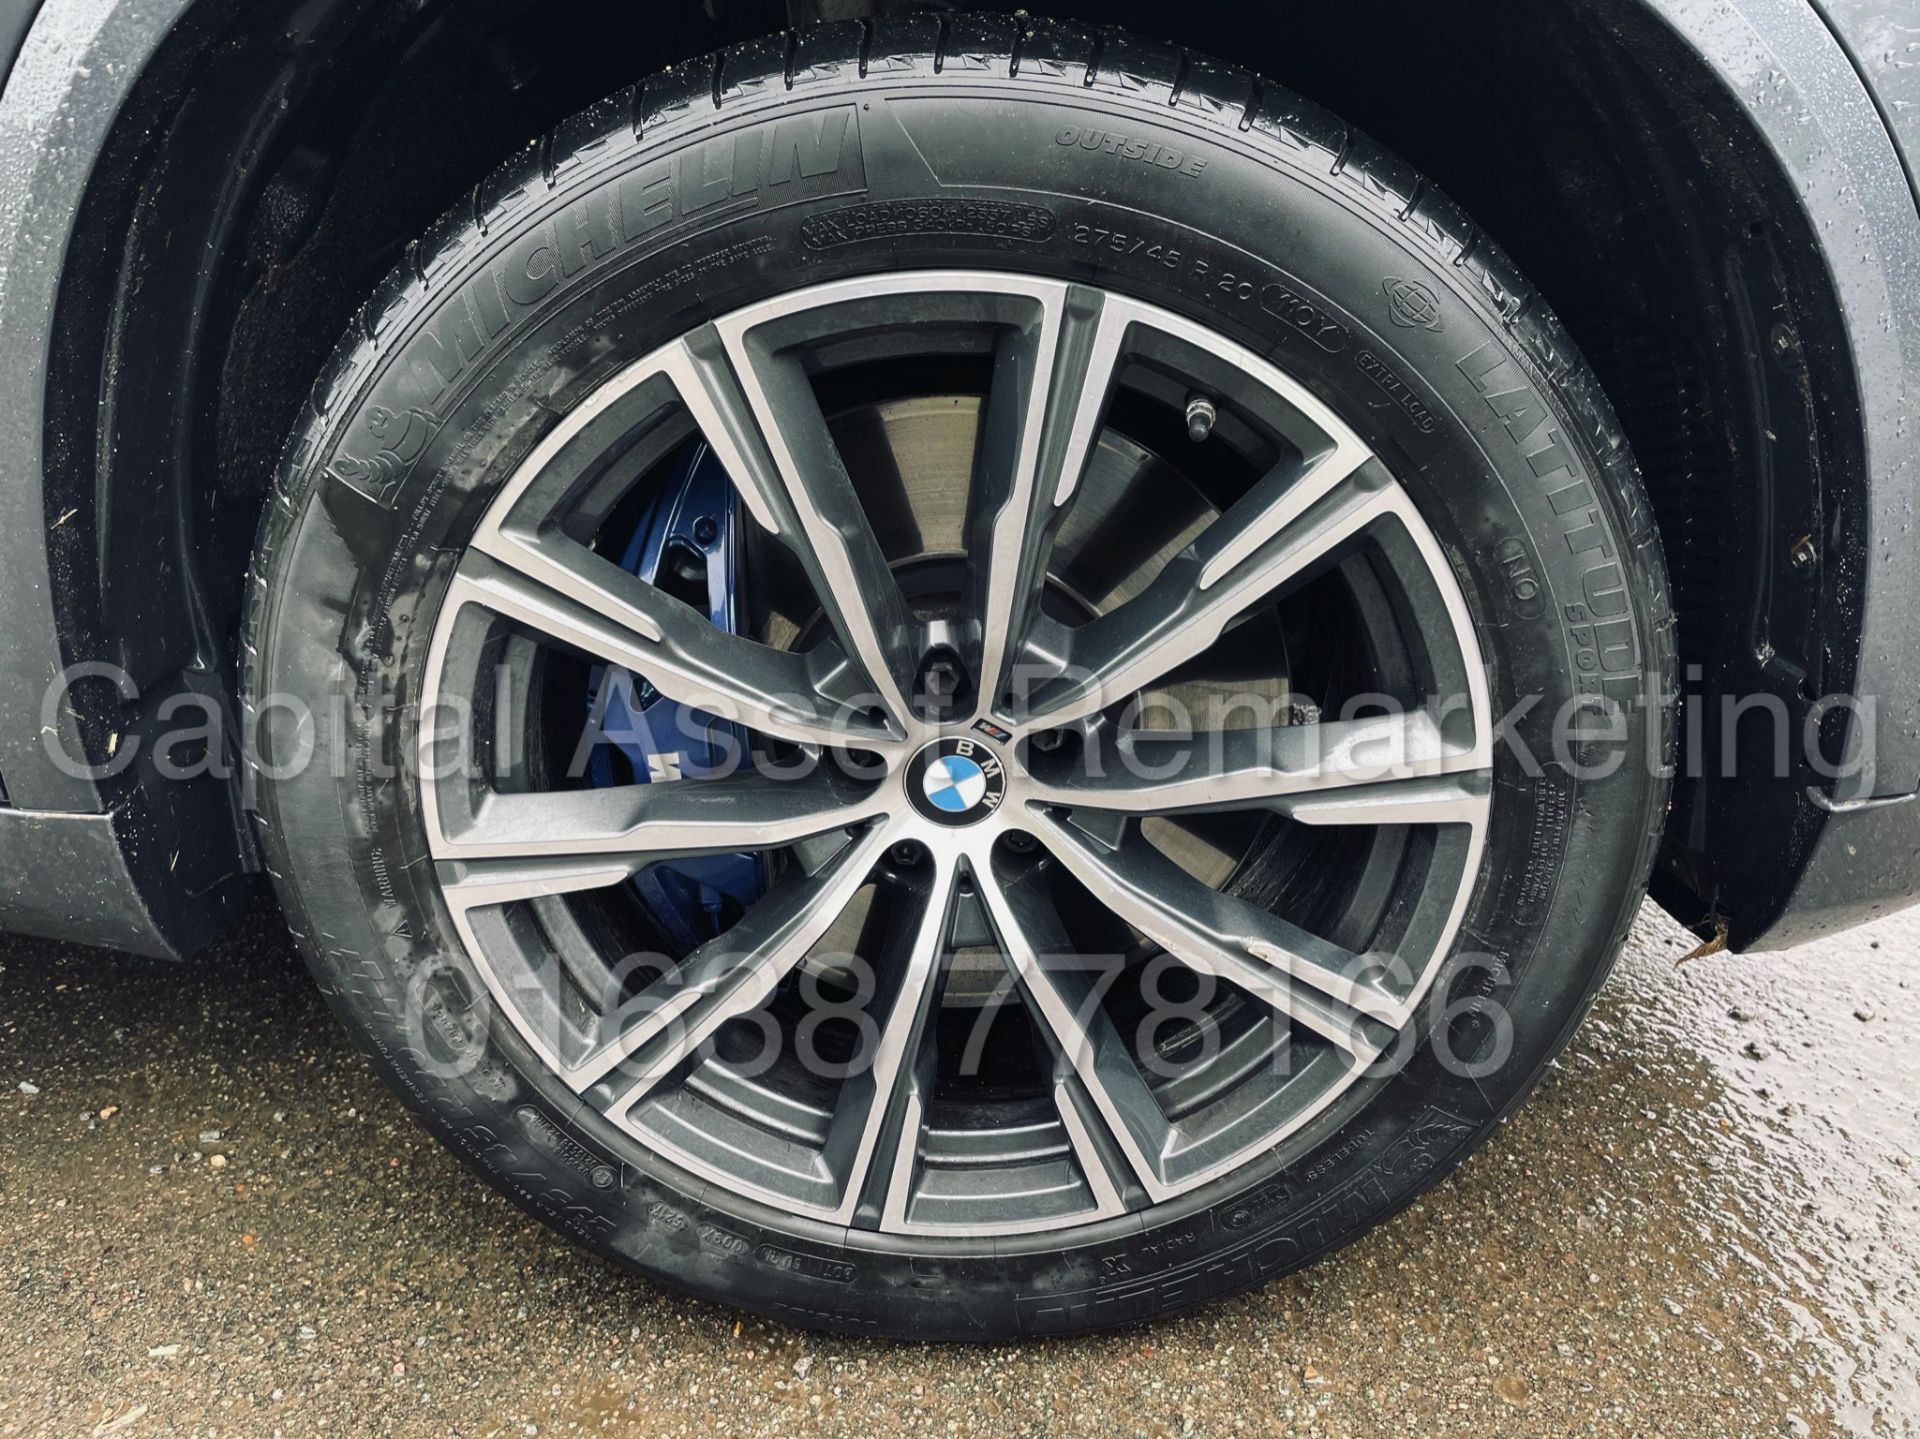 (On Sale) BMW X5 *M SPORT* X-DRIVE *7 SEATER SUV* (2019 - EURO 6) '3.0 DIESEL - AUTO' *PAN ROOF* - Image 18 of 70